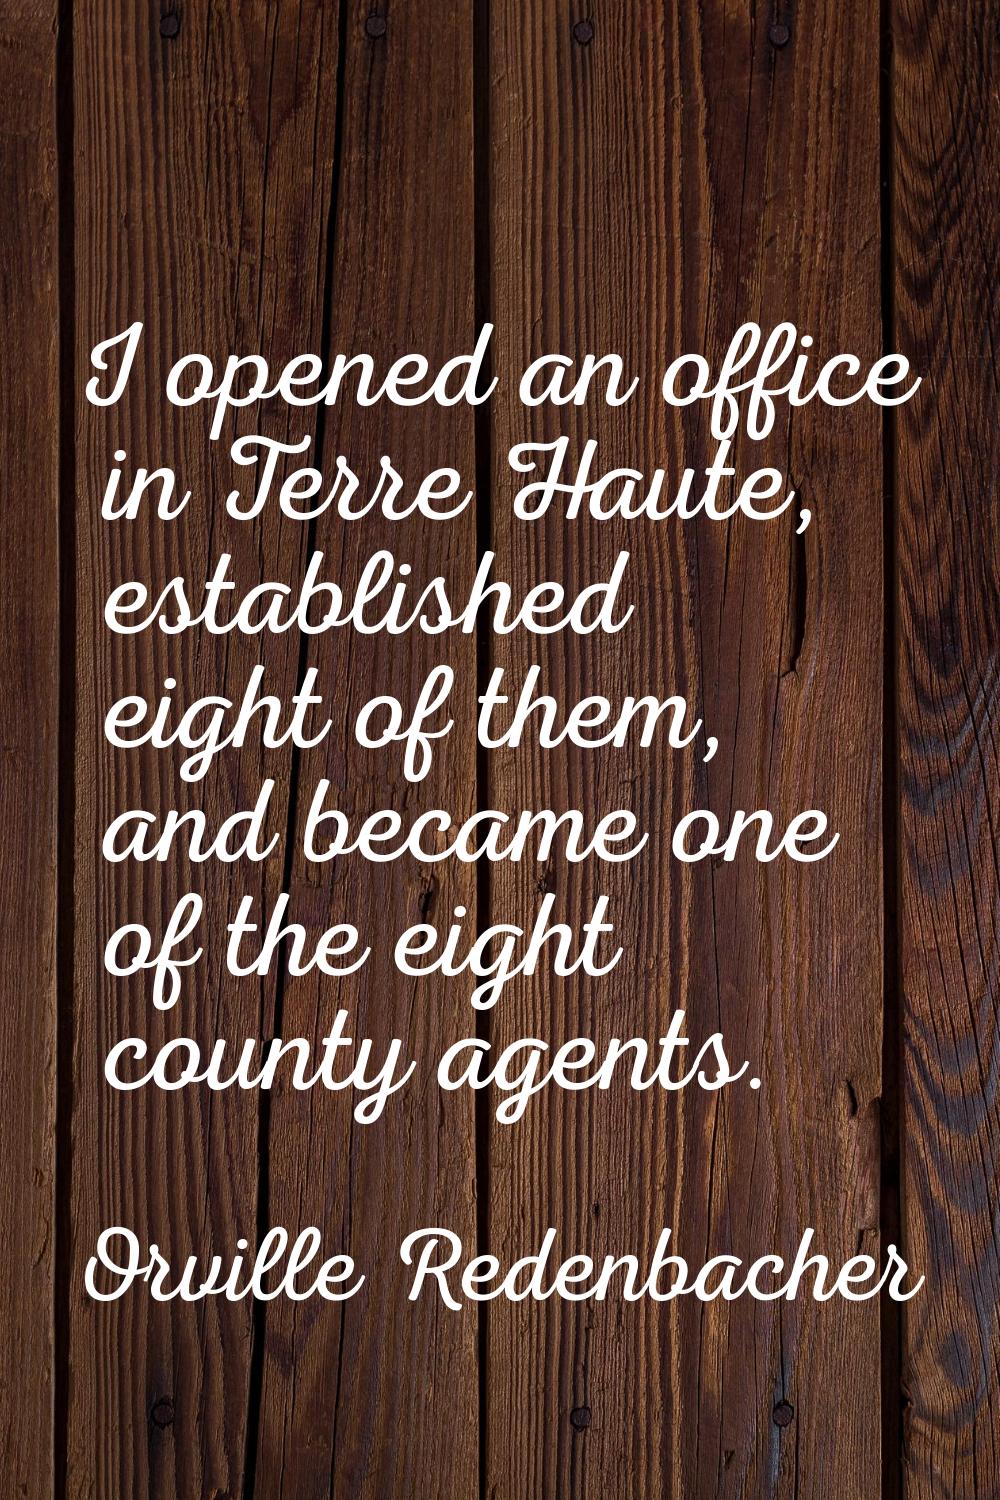 I opened an office in Terre Haute, established eight of them, and became one of the eight county ag